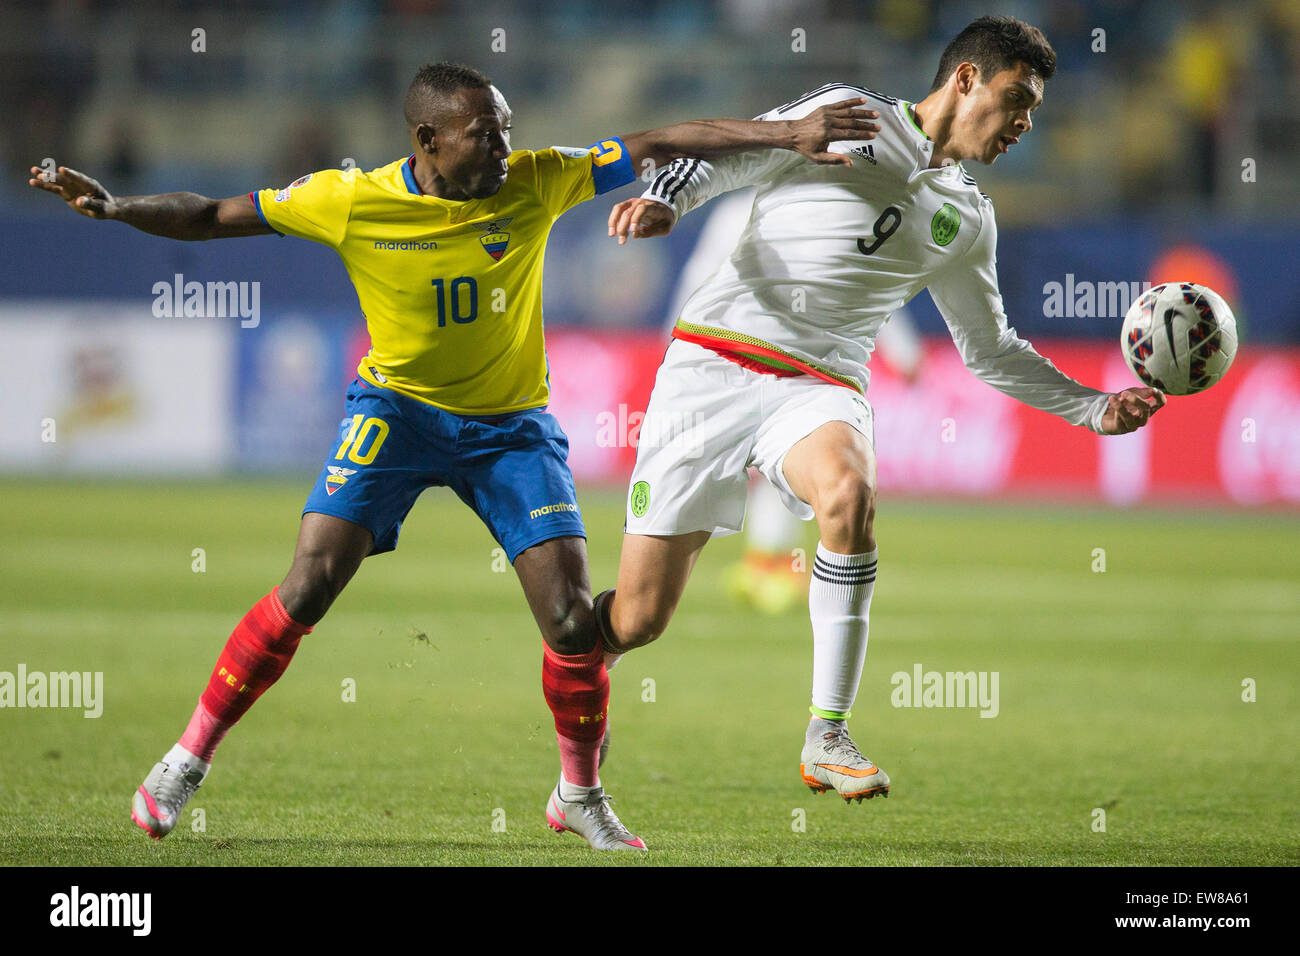 Rancagua, Chile. 19th June, 2015. Mexico's Raul Jimenez (R) vies with Ecuador's Walter Ayovi during the Group A match of the Copa America Chile 2015, held in the El Teniente stadium, in Rancagua, Chile, on June 19, 2015. Ecuador won 2-1. Credit:  Luis Echeverria/Xinhua/Alamy Live News Stock Photo